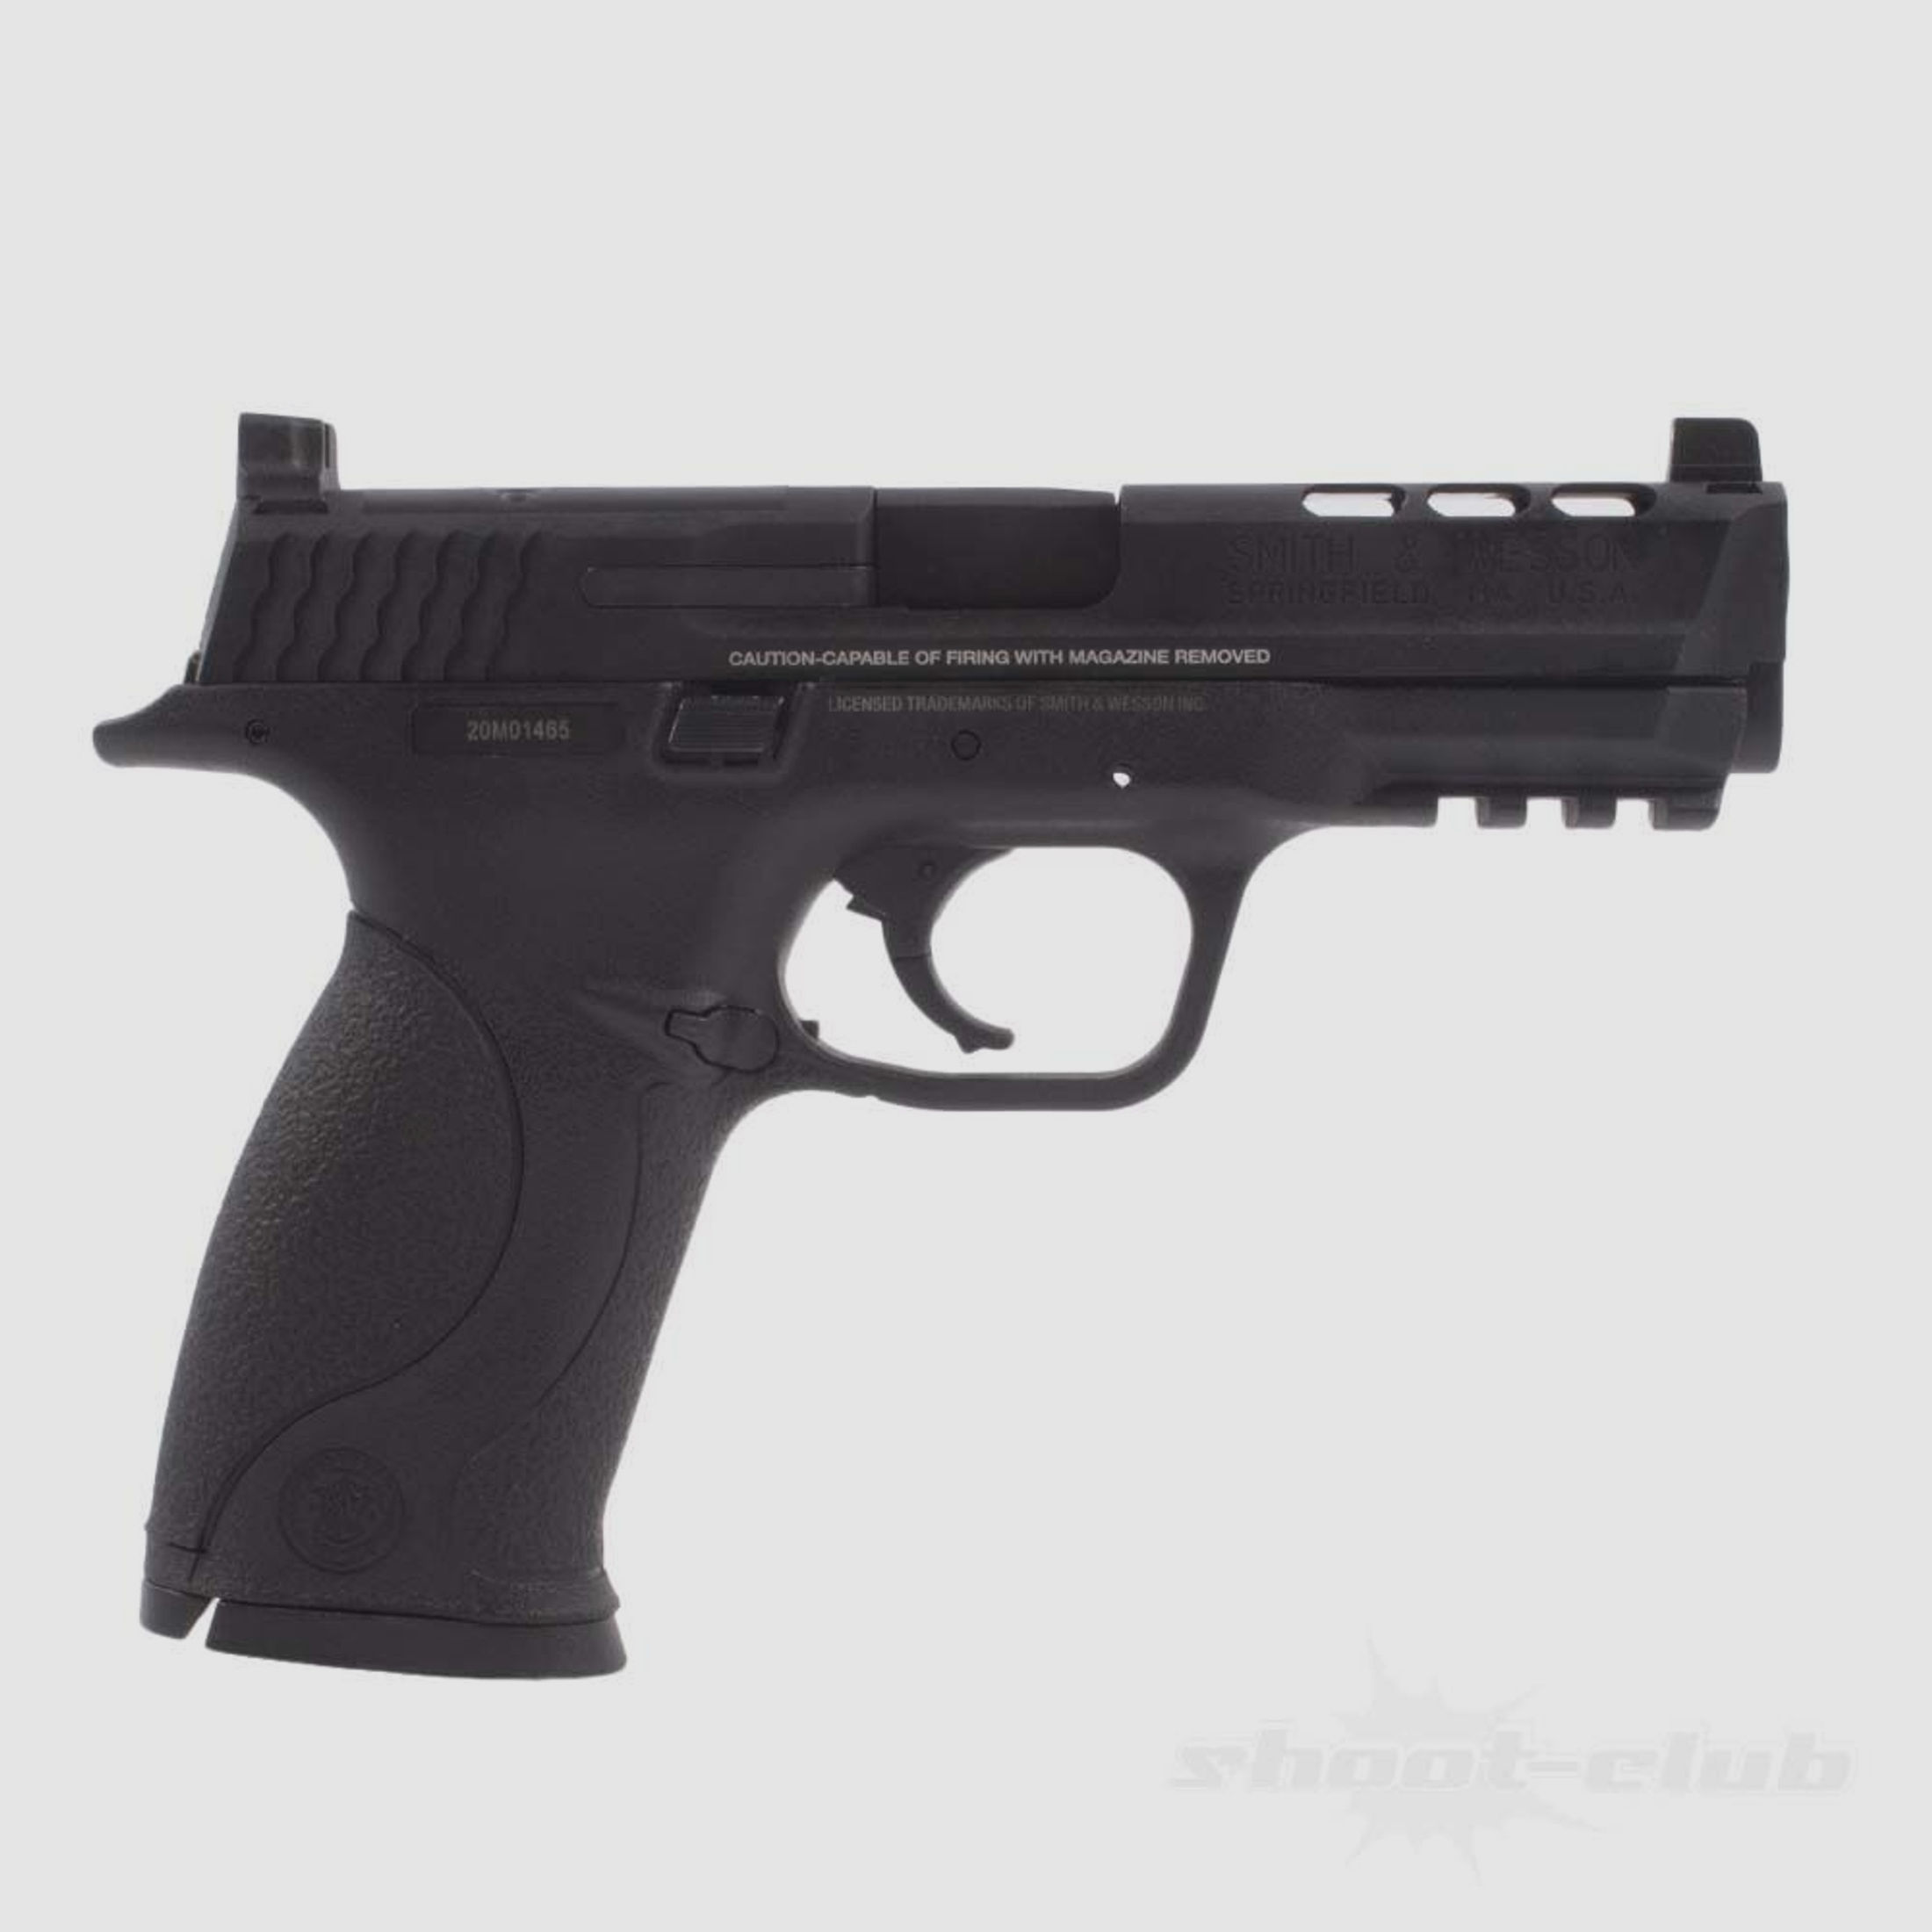 Smith & Wesson M&P9 Performance Center Airsoft GBB Pistole ab 18